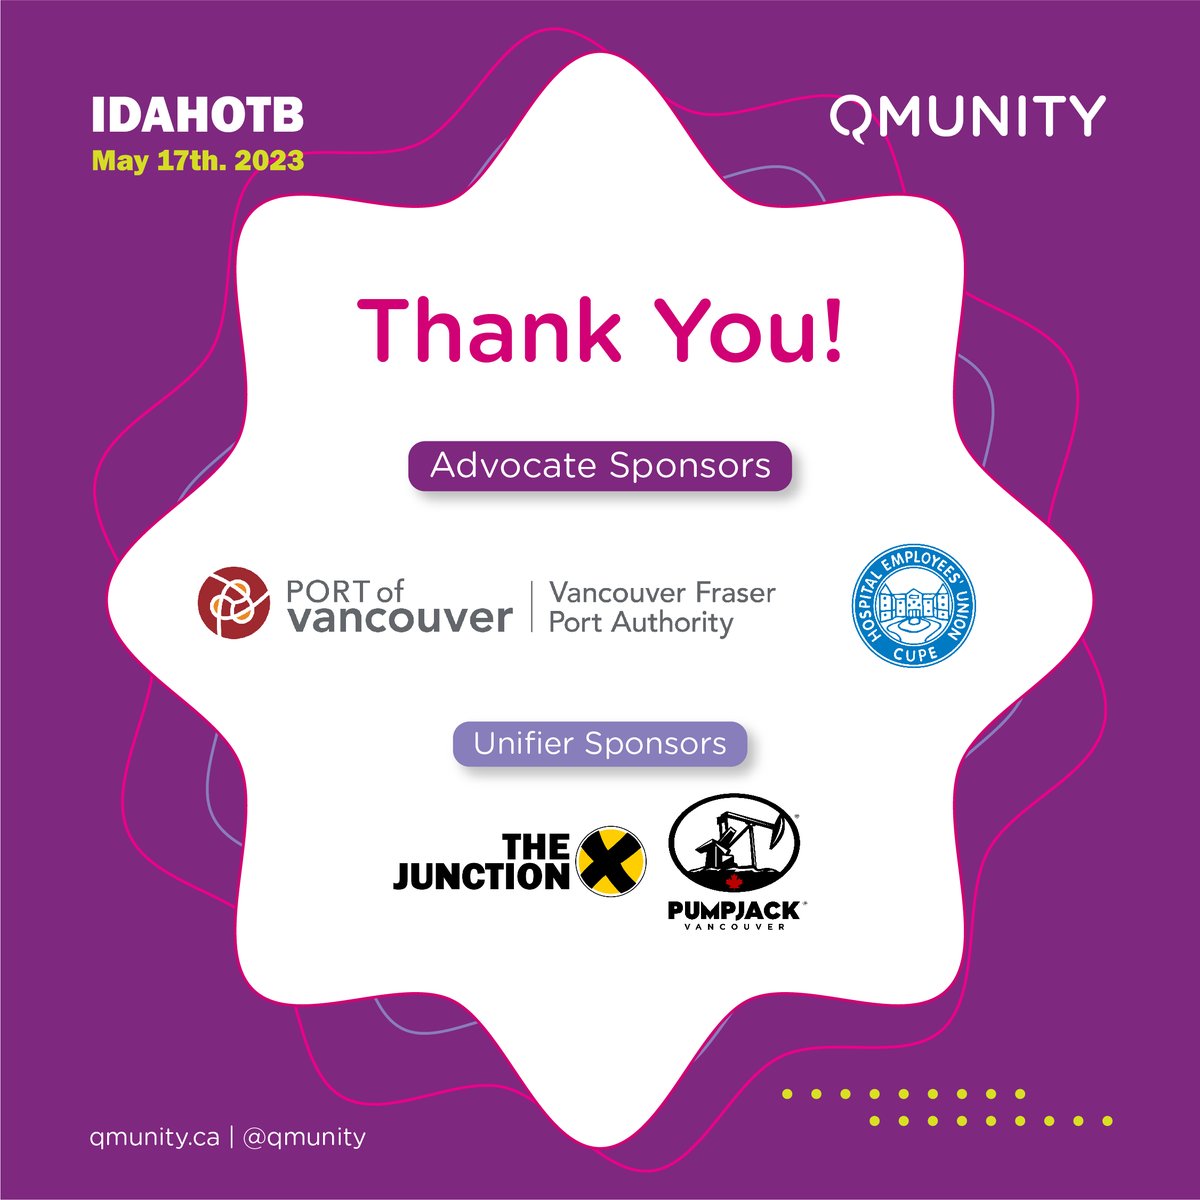 We want to extend a special thank you to our Presenting Sponsor, @Vancity, Champion Sponsor, @LawsonLundell, Advocate Sponsors @PortVancouver @HospitalEmploy2, Unifier Sponsors @TheJunctionPub @PumpjackPub for their commitment to improving the lives of 2SLGBTQIA+ communities.